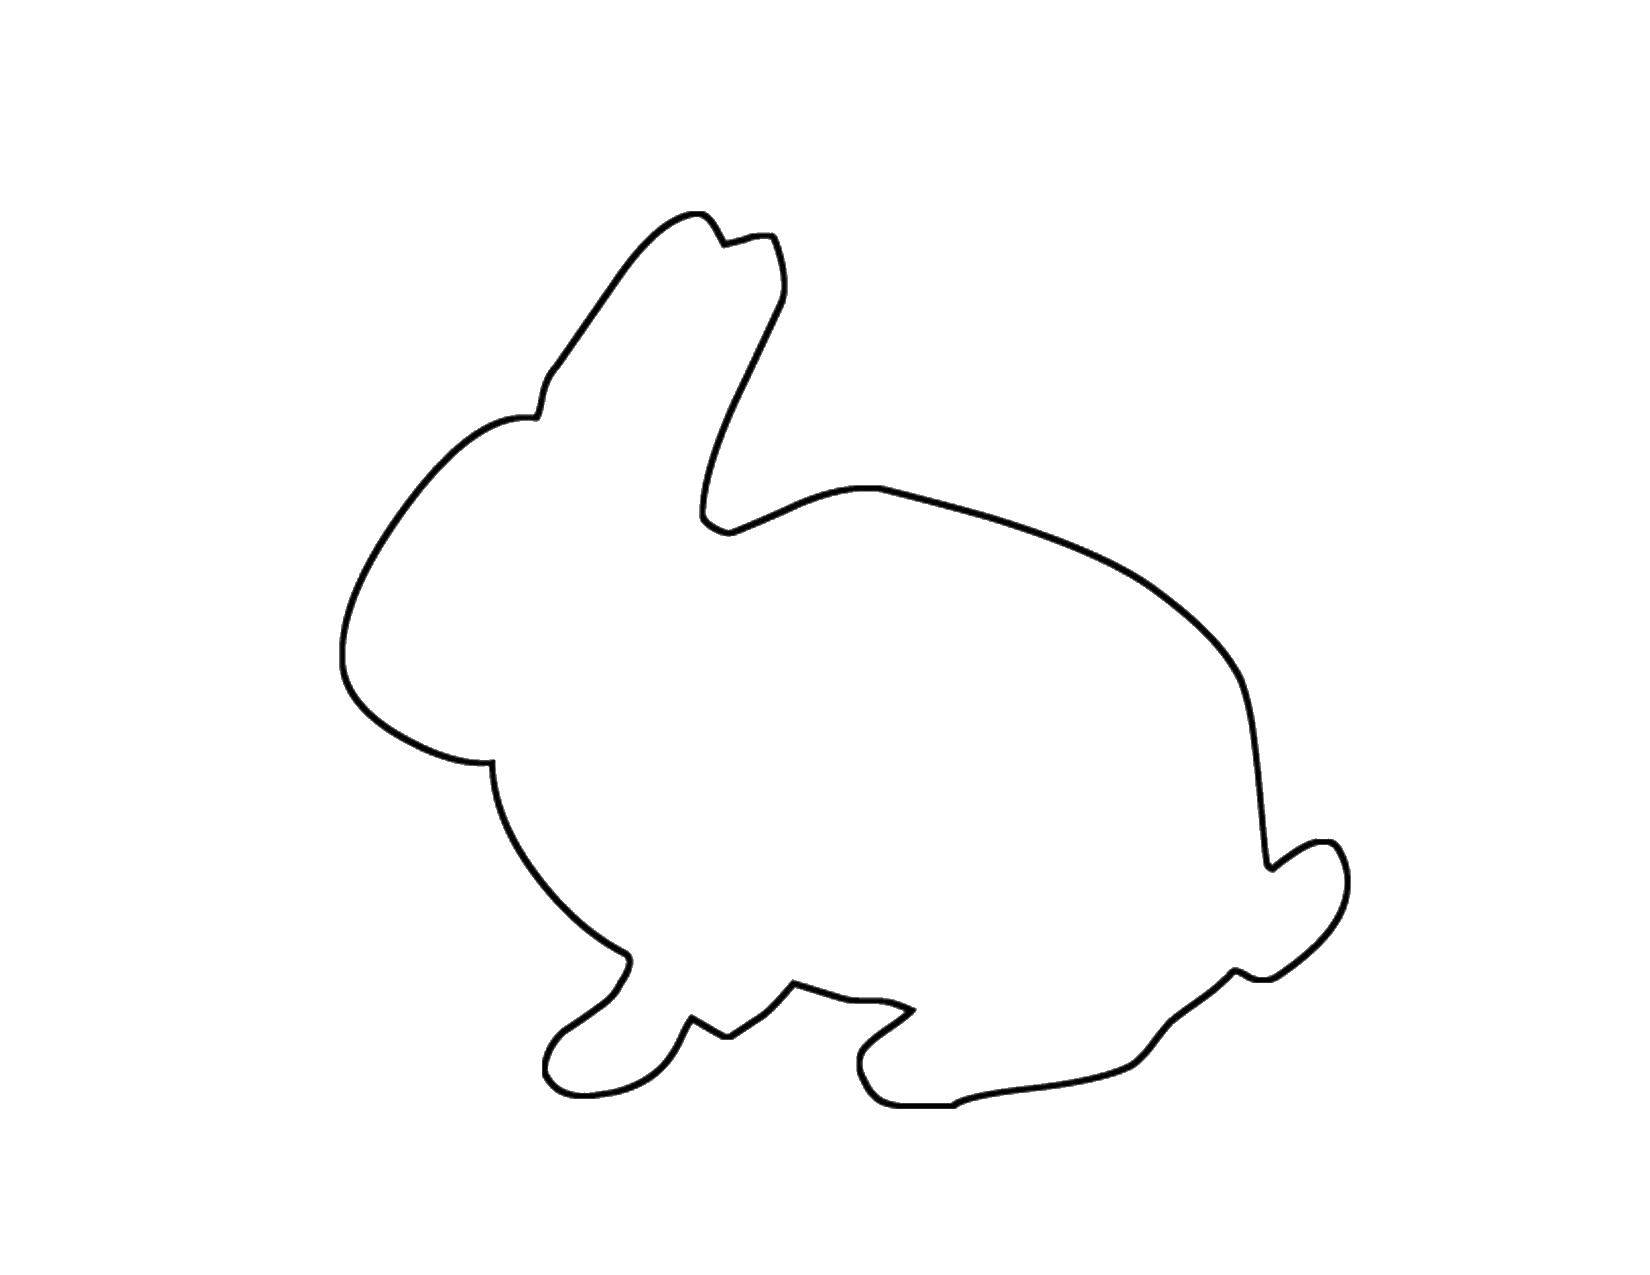 Coloring The outline of the hare. Category The contour of the hare to cut. Tags:  the contours, hares, rabbits.